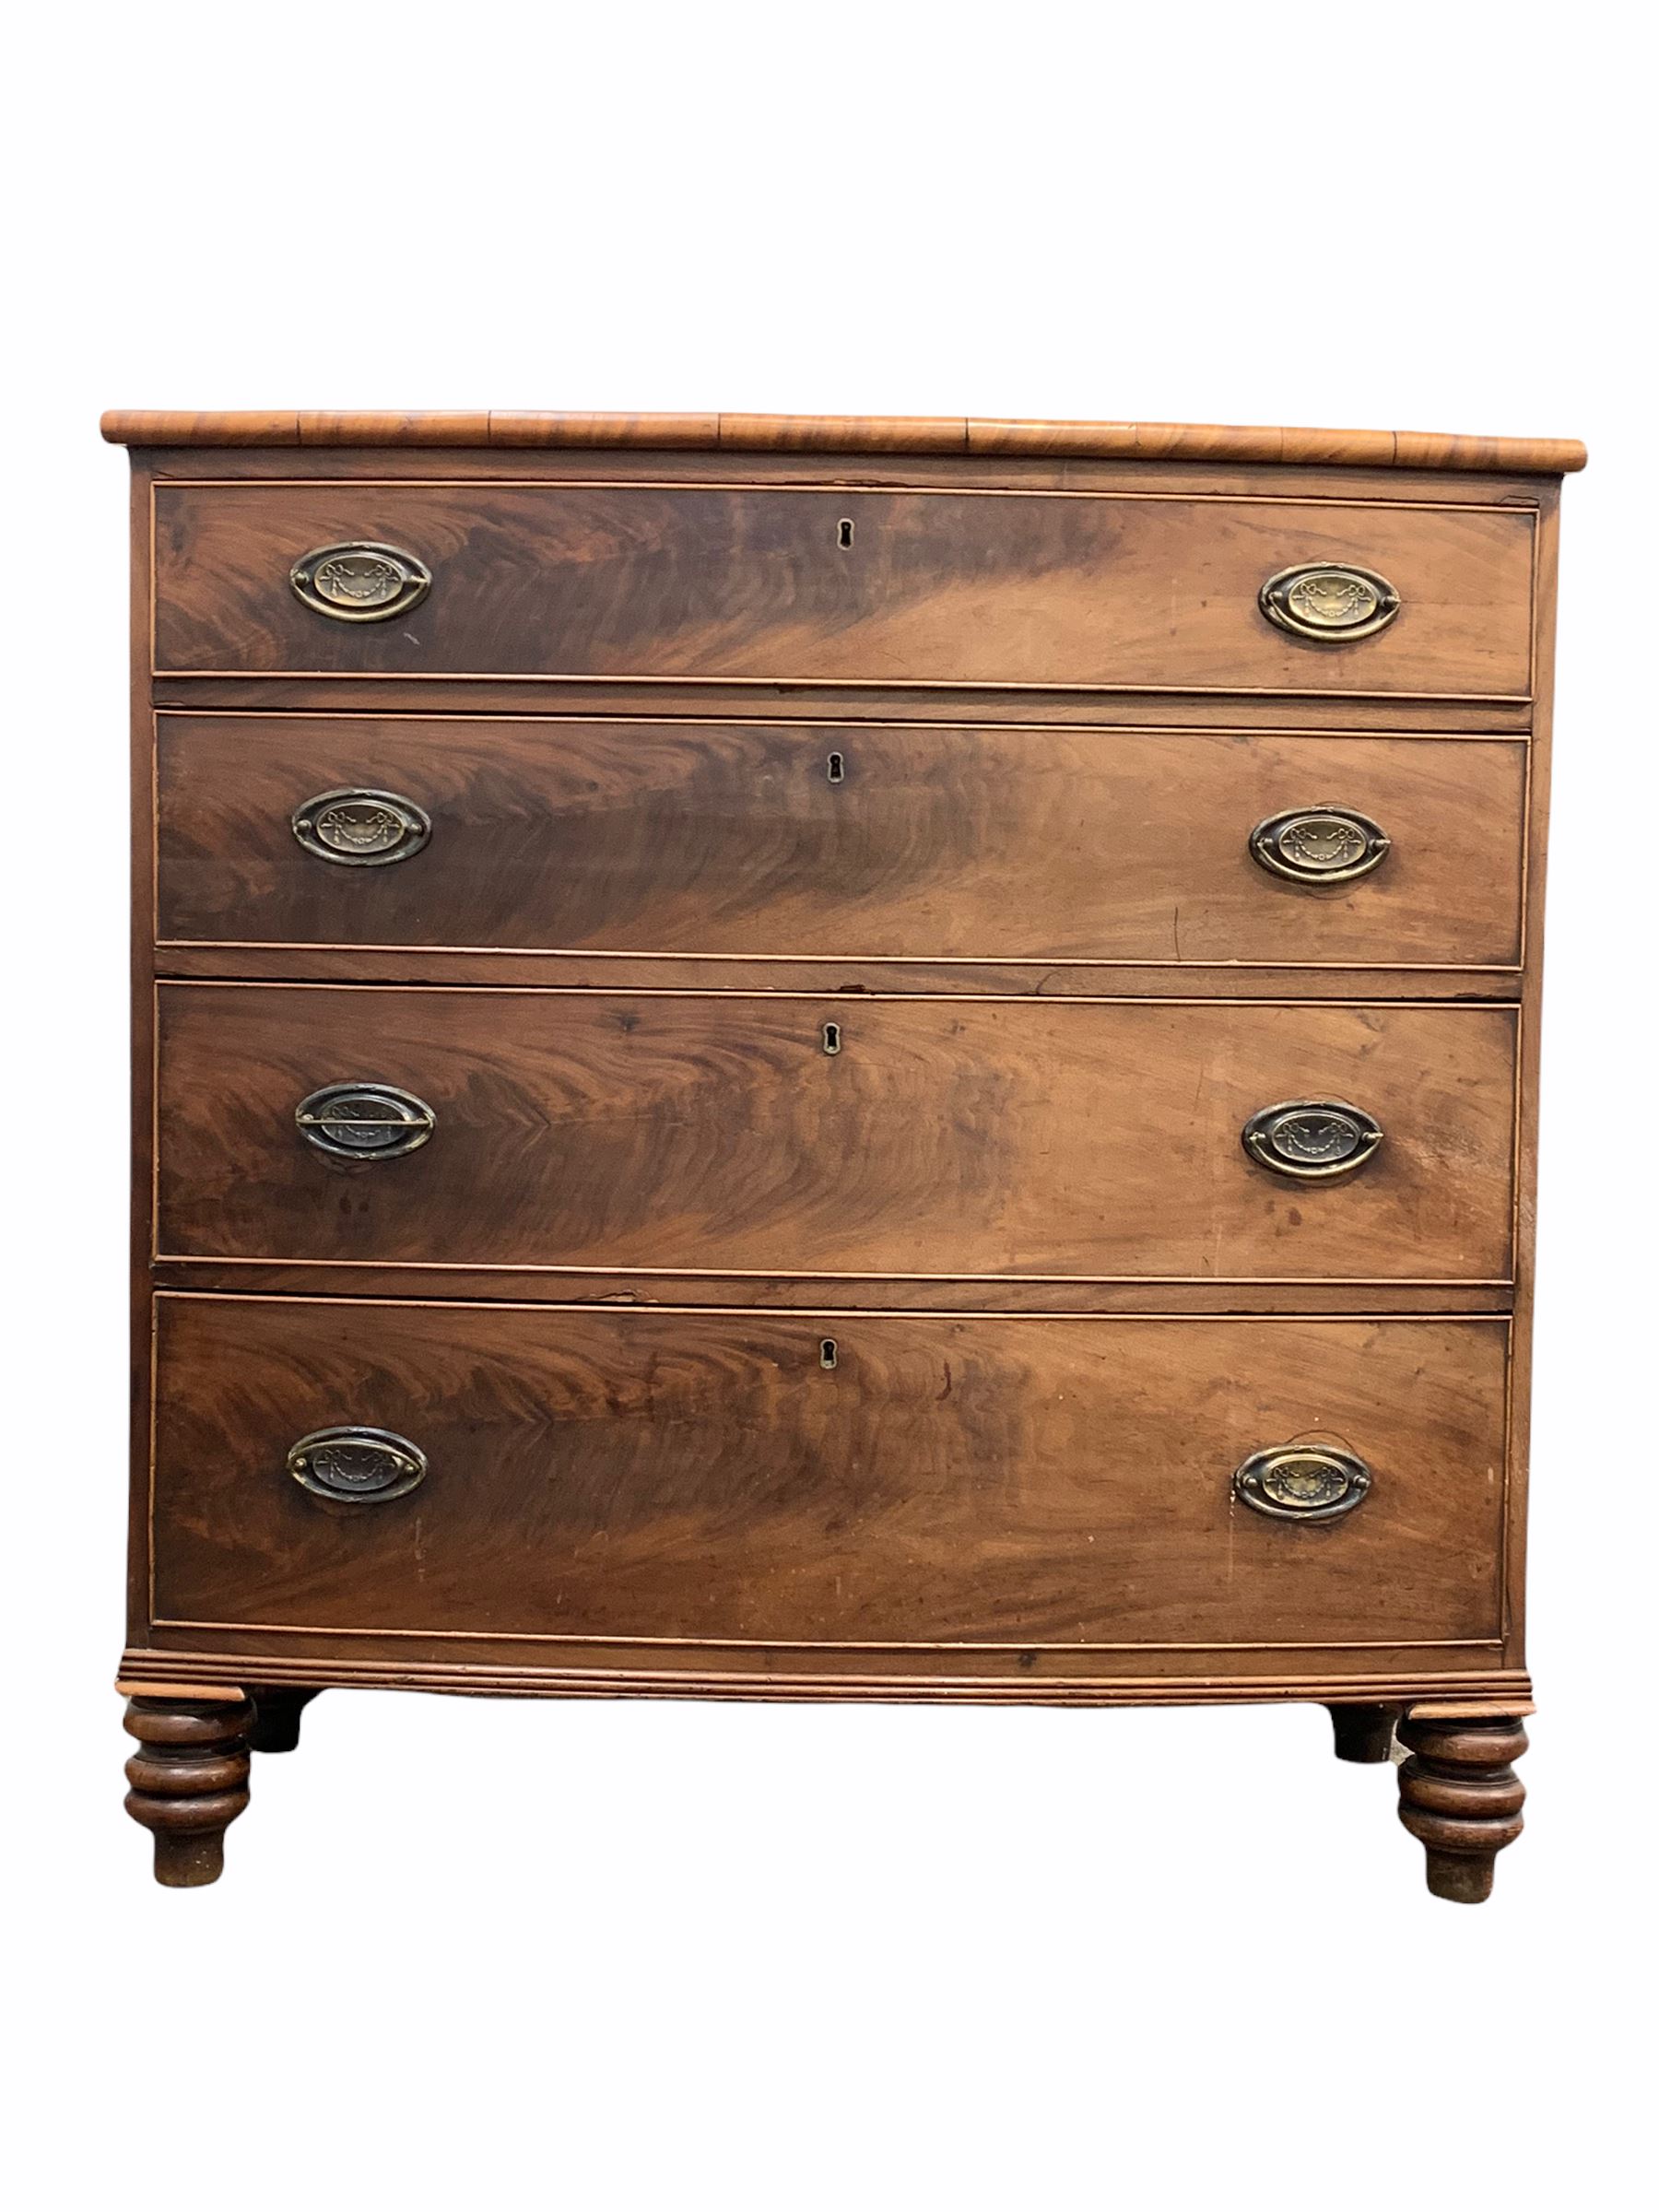 Mid 19th century mahogany bow front chest of drawers with four graduated drawers